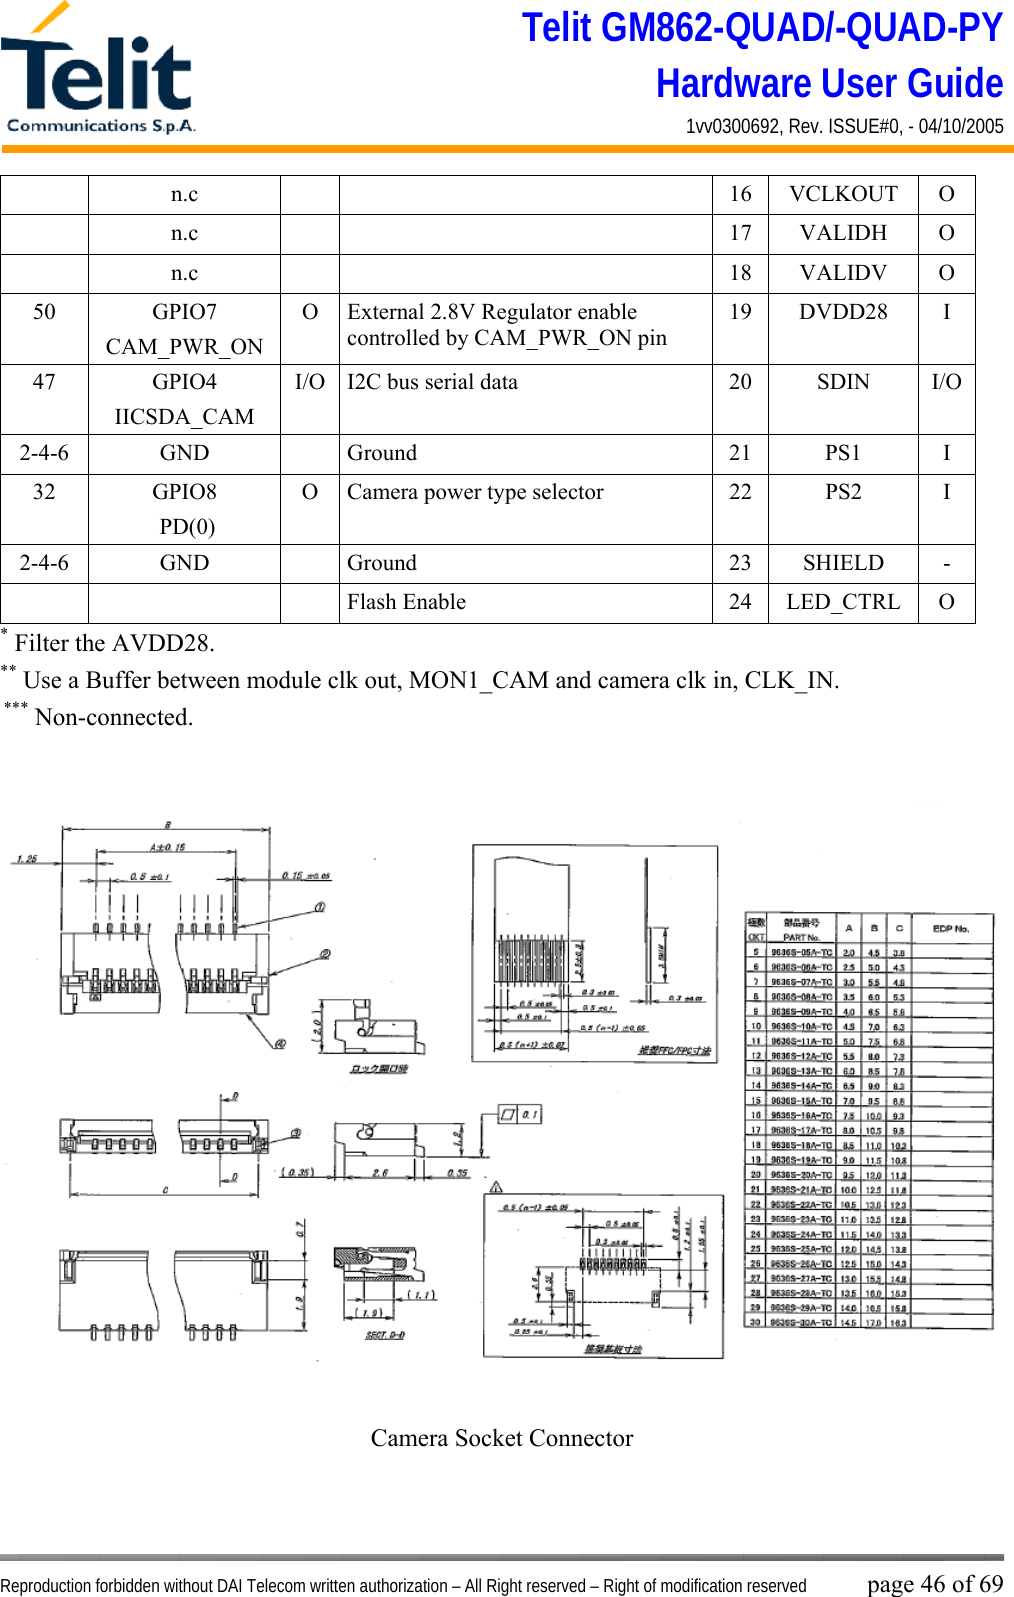 Telit GM862-QUAD/-QUAD-PY Hardware User Guide 1vv0300692, Rev. ISSUE#0, - 04/10/2005   Reproduction forbidden without DAI Telecom written authorization – All Right reserved – Right of modification reserved page 46 of 69  n.c    16 VCLKOUT O  n.c    17 VALIDH O  n.c    18 VALIDV O 50 GPIO7 CAM_PWR_ON O  External 2.8V Regulator enable controlled by CAM_PWR_ON pin 19 DVDD28  I 47 GPIO4 IICSDA_CAM I/O  I2C bus serial data  20  SDIN  I/O 2-4-6 GND   Ground  21 PS1 I 32 GPIO8  PD(0) O  Camera power type selector  22  PS2  I 2-4-6 GND   Ground  23 SHIELD -    Flash Enable  24 LED_CTRL O * Filter the AVDD28. ** Use a Buffer between module clk out, MON1_CAM and camera clk in, CLK_IN.  *** Non-connected.                  Camera Socket Connector 